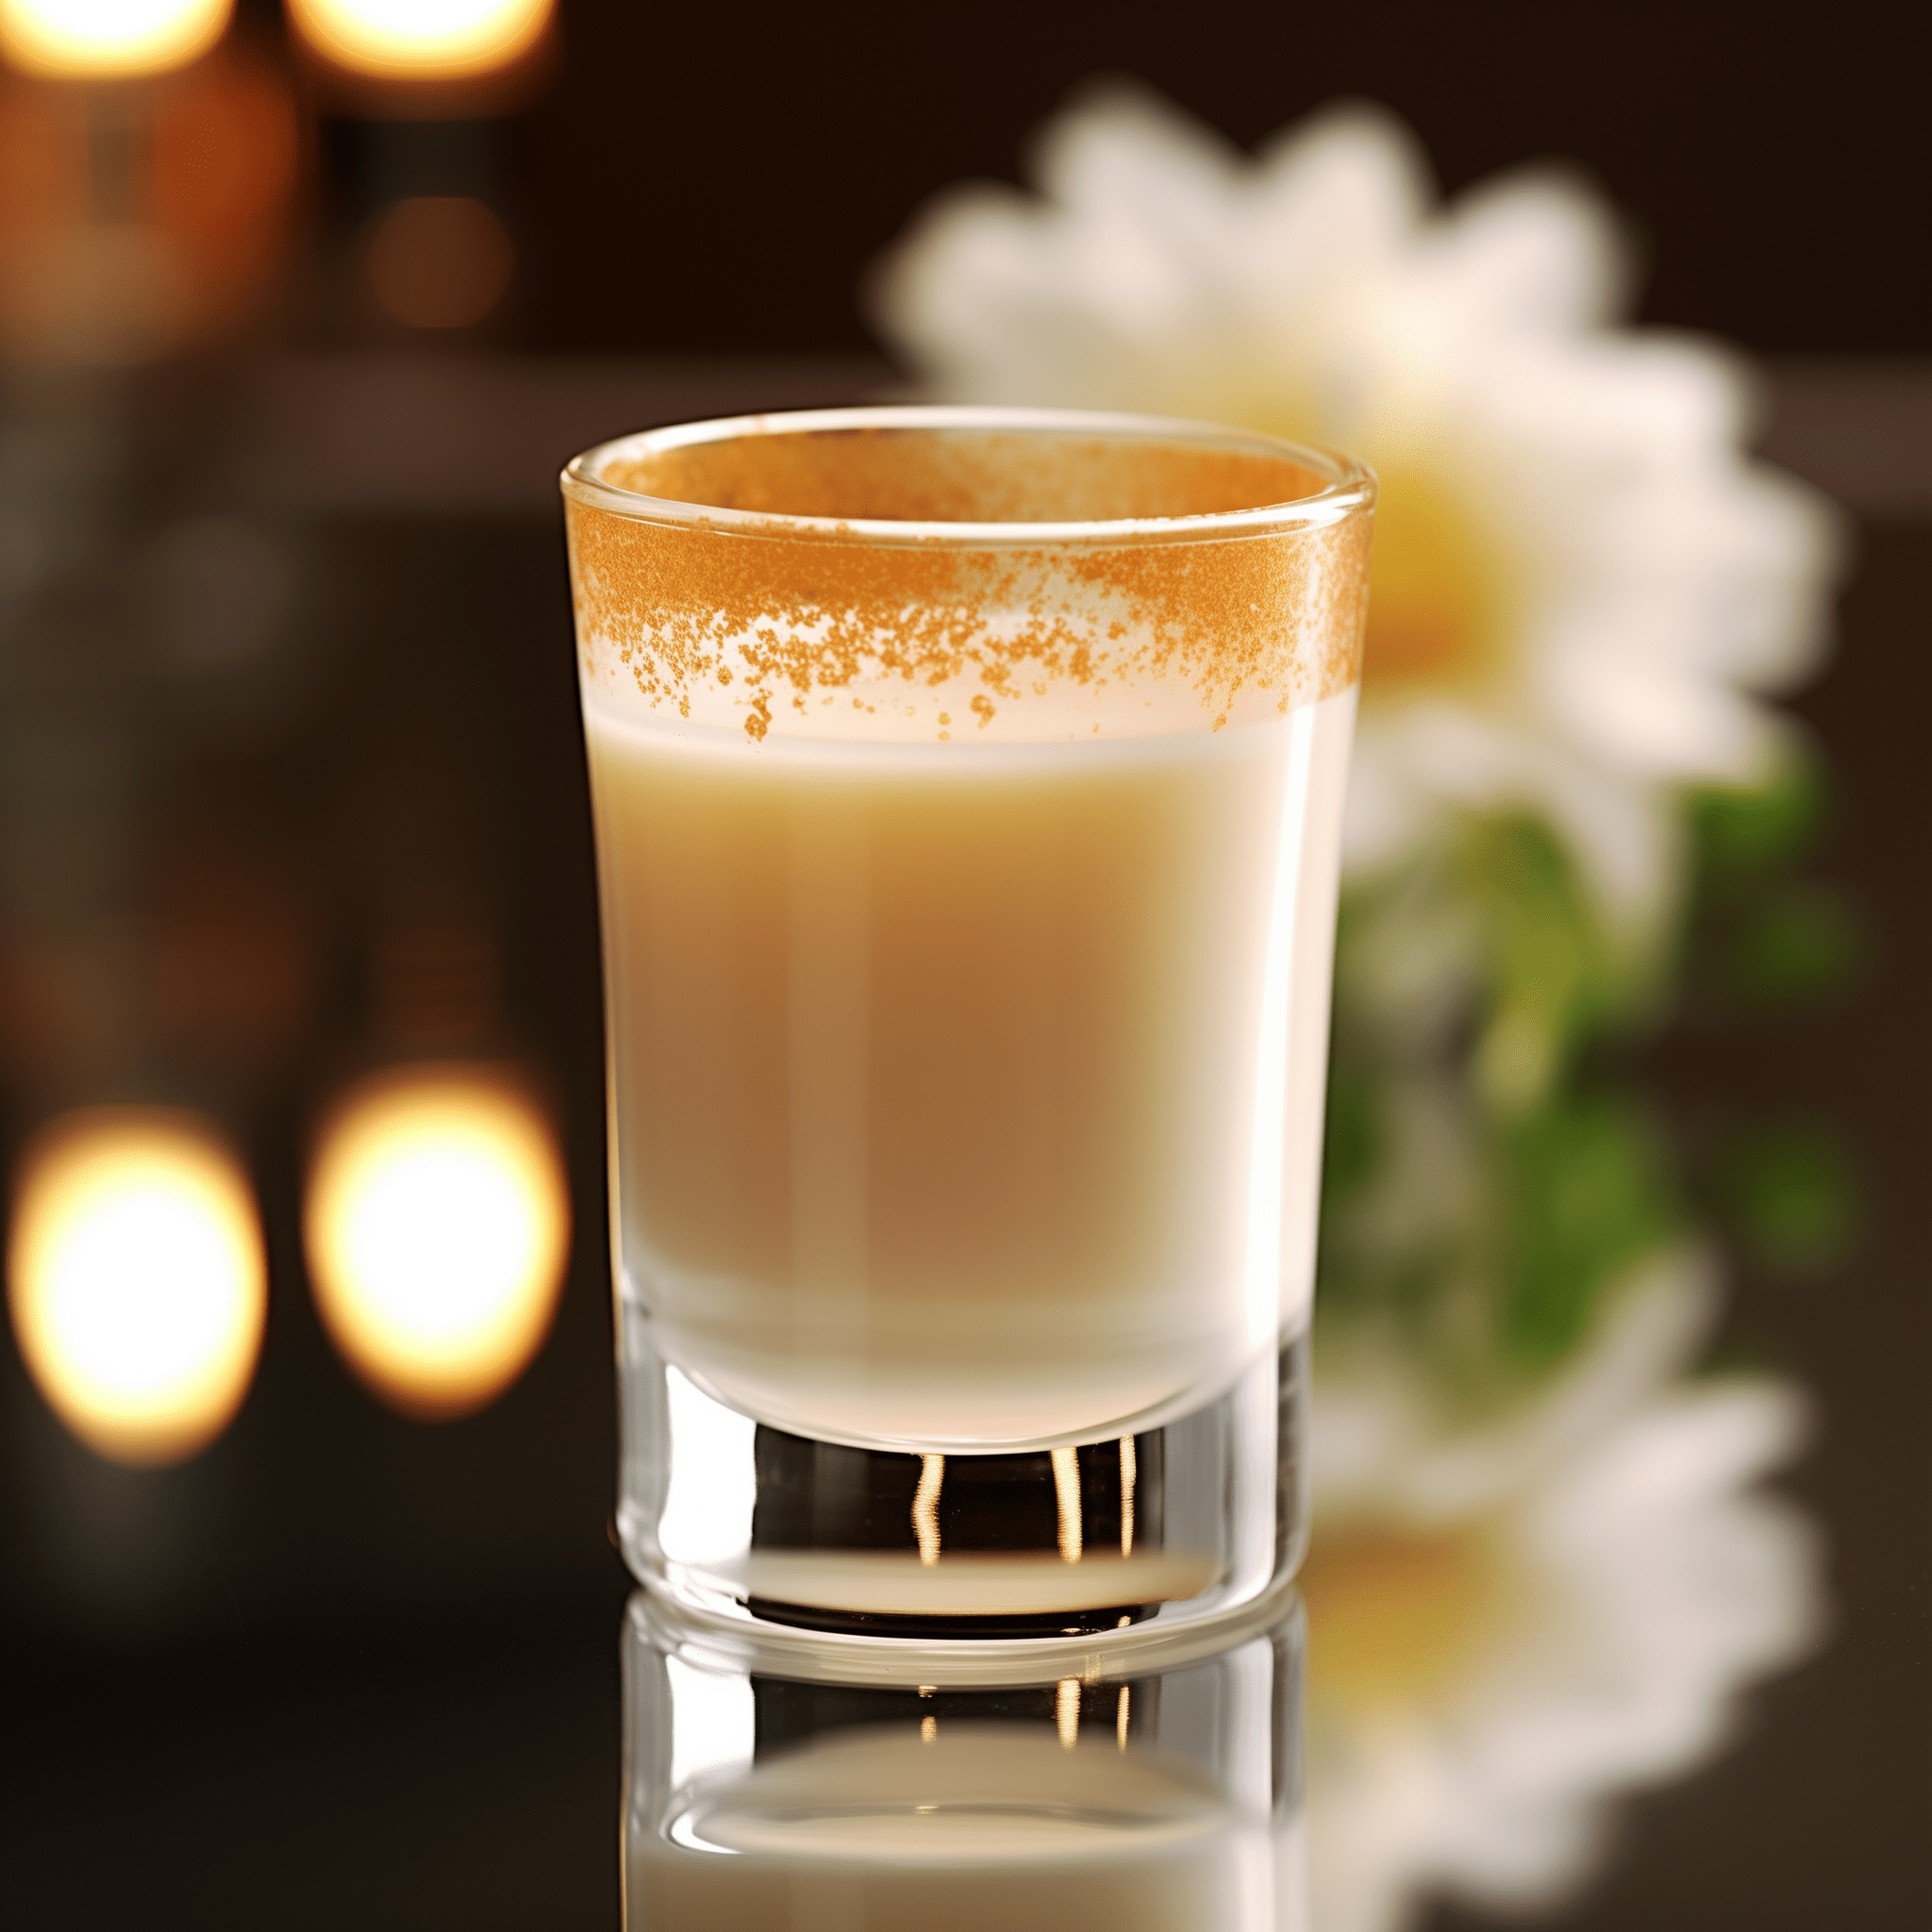 Wedding Cake Shot Recipe - The Wedding Cake Shot is a sweet and creamy delight with a nutty undertone. The vanilla vodka provides a smooth, cake-like base, while the Frangelico adds a rich hazelnut flavor that complements the sweetness perfectly.